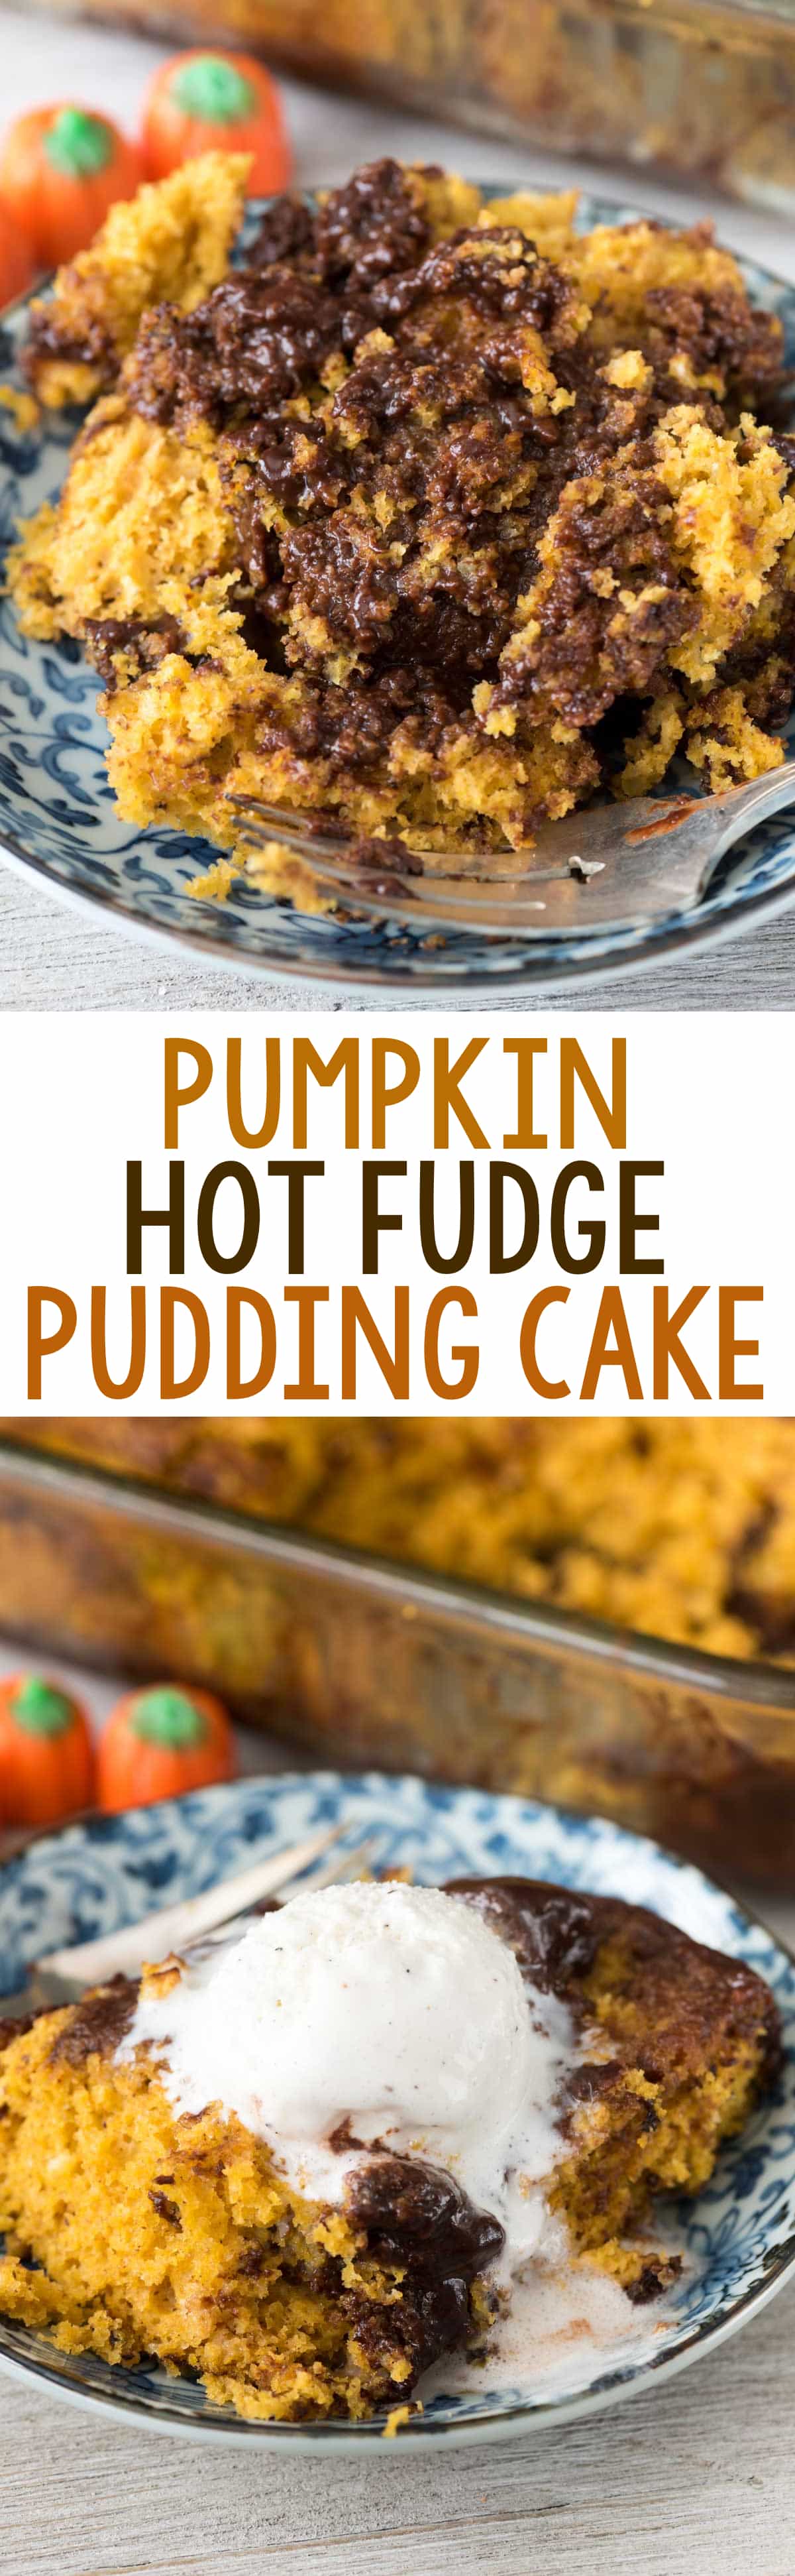 Pumpkin Hot Fudge Pudding Cake - this easy pumpkin cake recipe starts with a cake mix and is baked with chocolate that turns into hot fudge pudding!